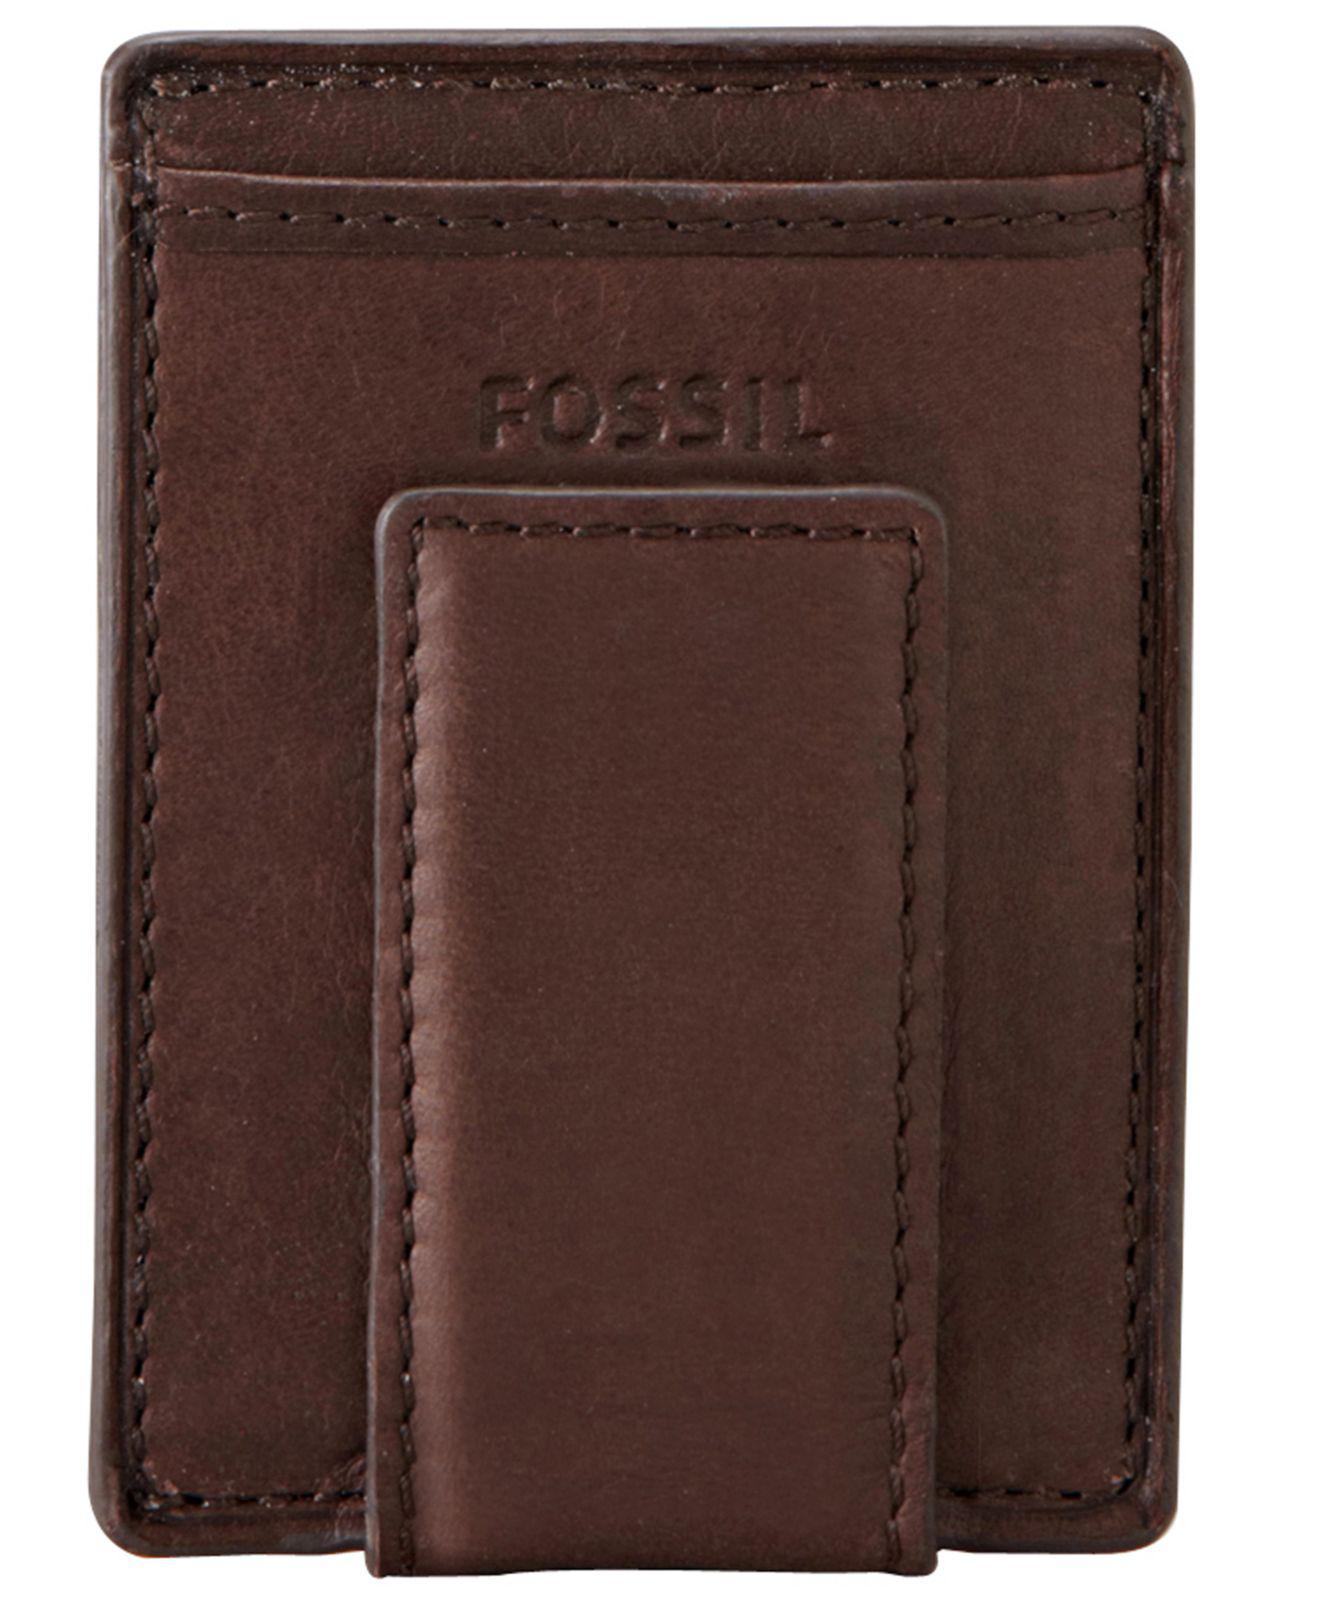 Fossil Leather Wallets, Ingram Magnetic Multicard Wallet in Brown for ...